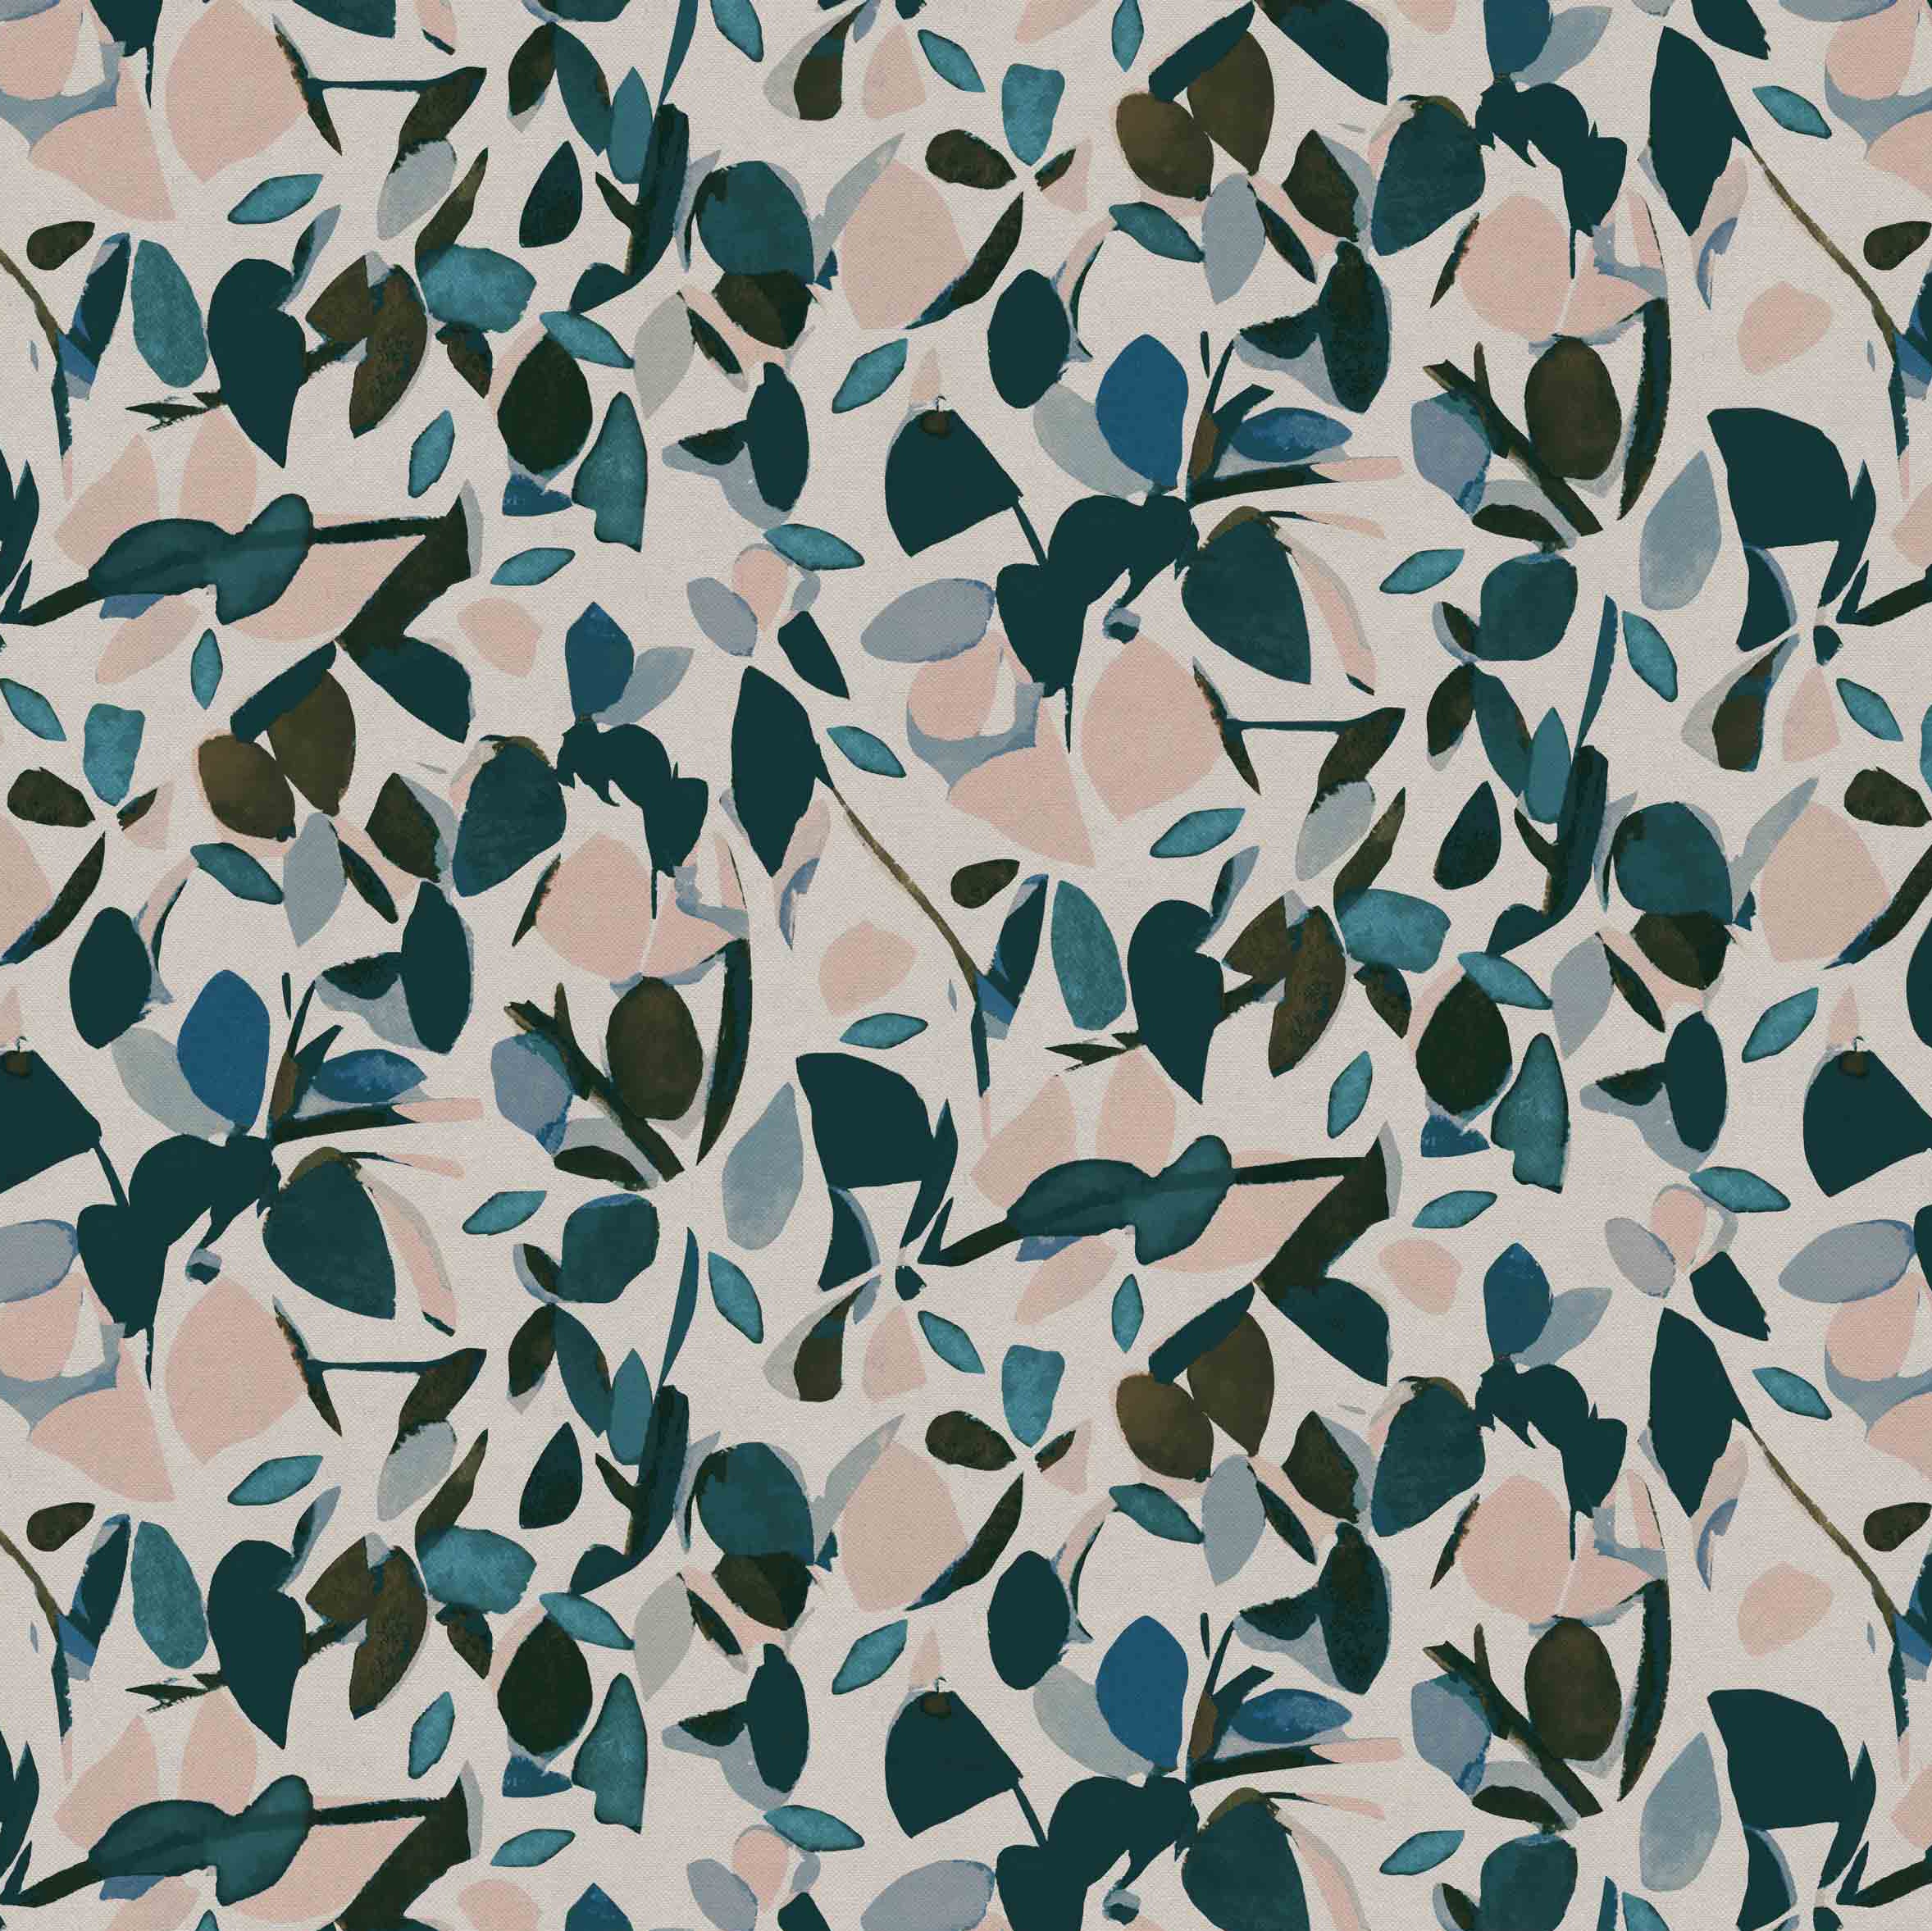 Detail of fabric in a minimal leaf print in shades of blue, brown and pink on a tan field.